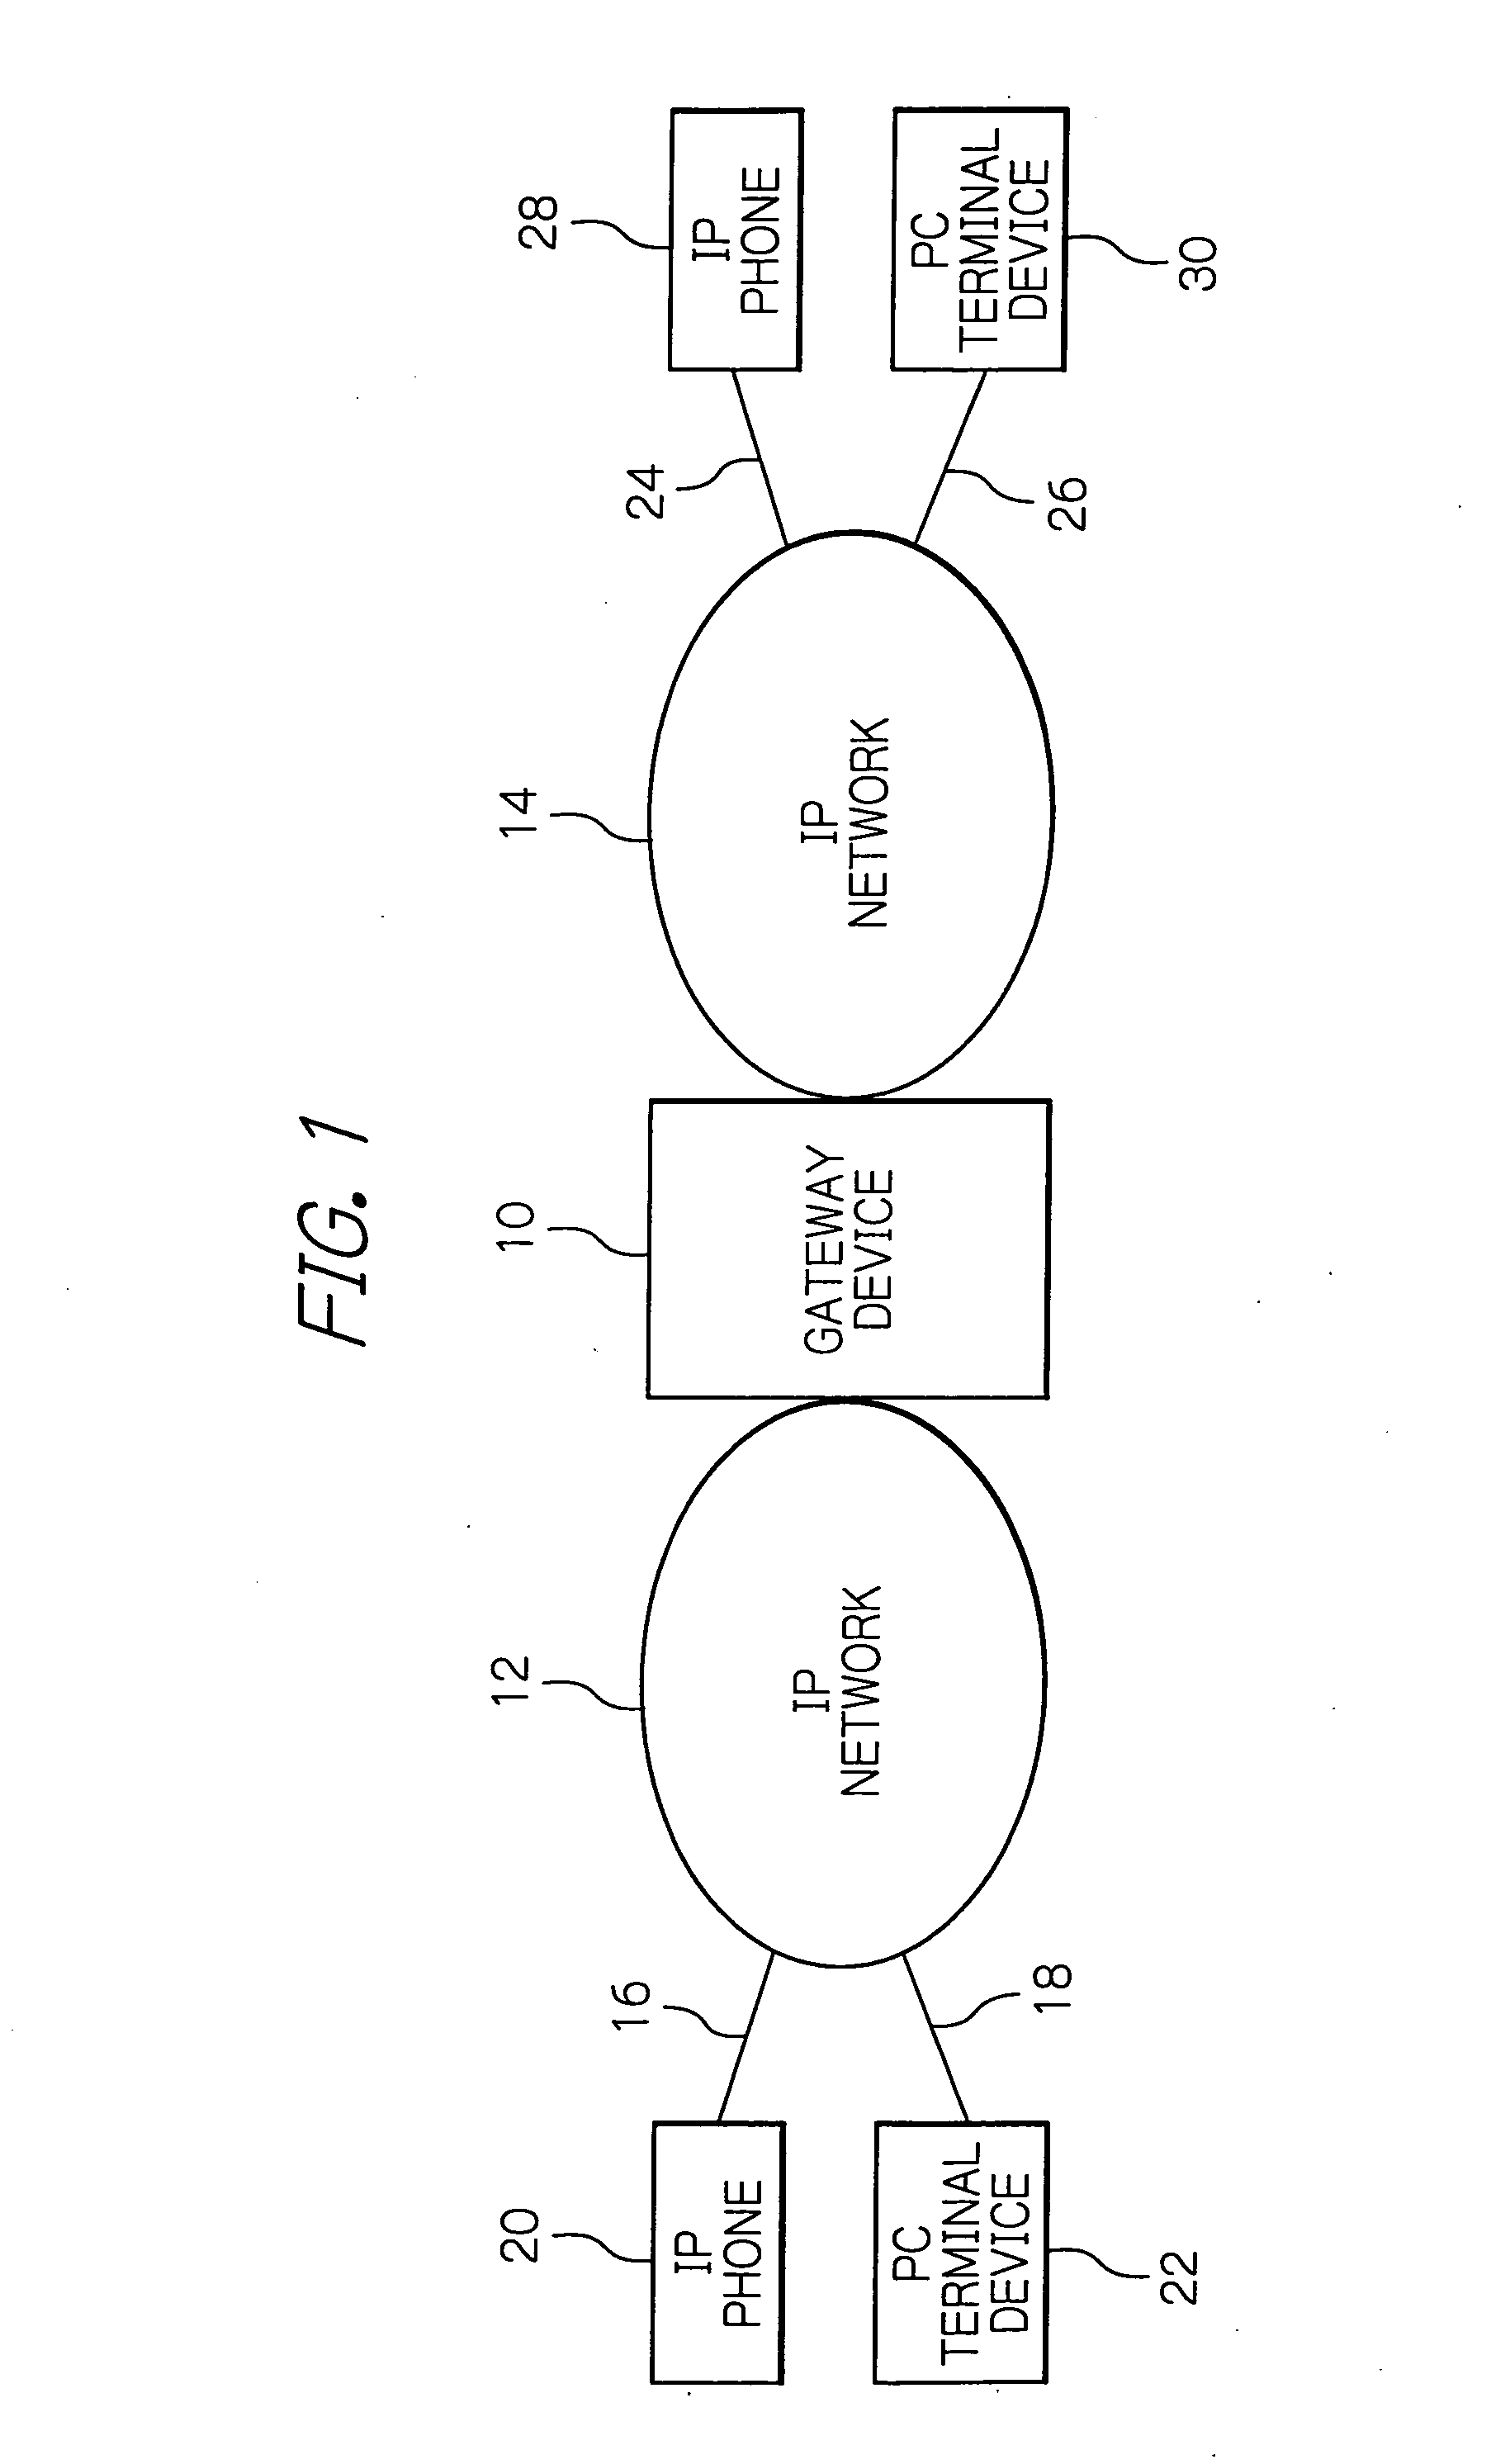 Media conversion device for interconnecting communication terminal devices with media converted and a method therefor